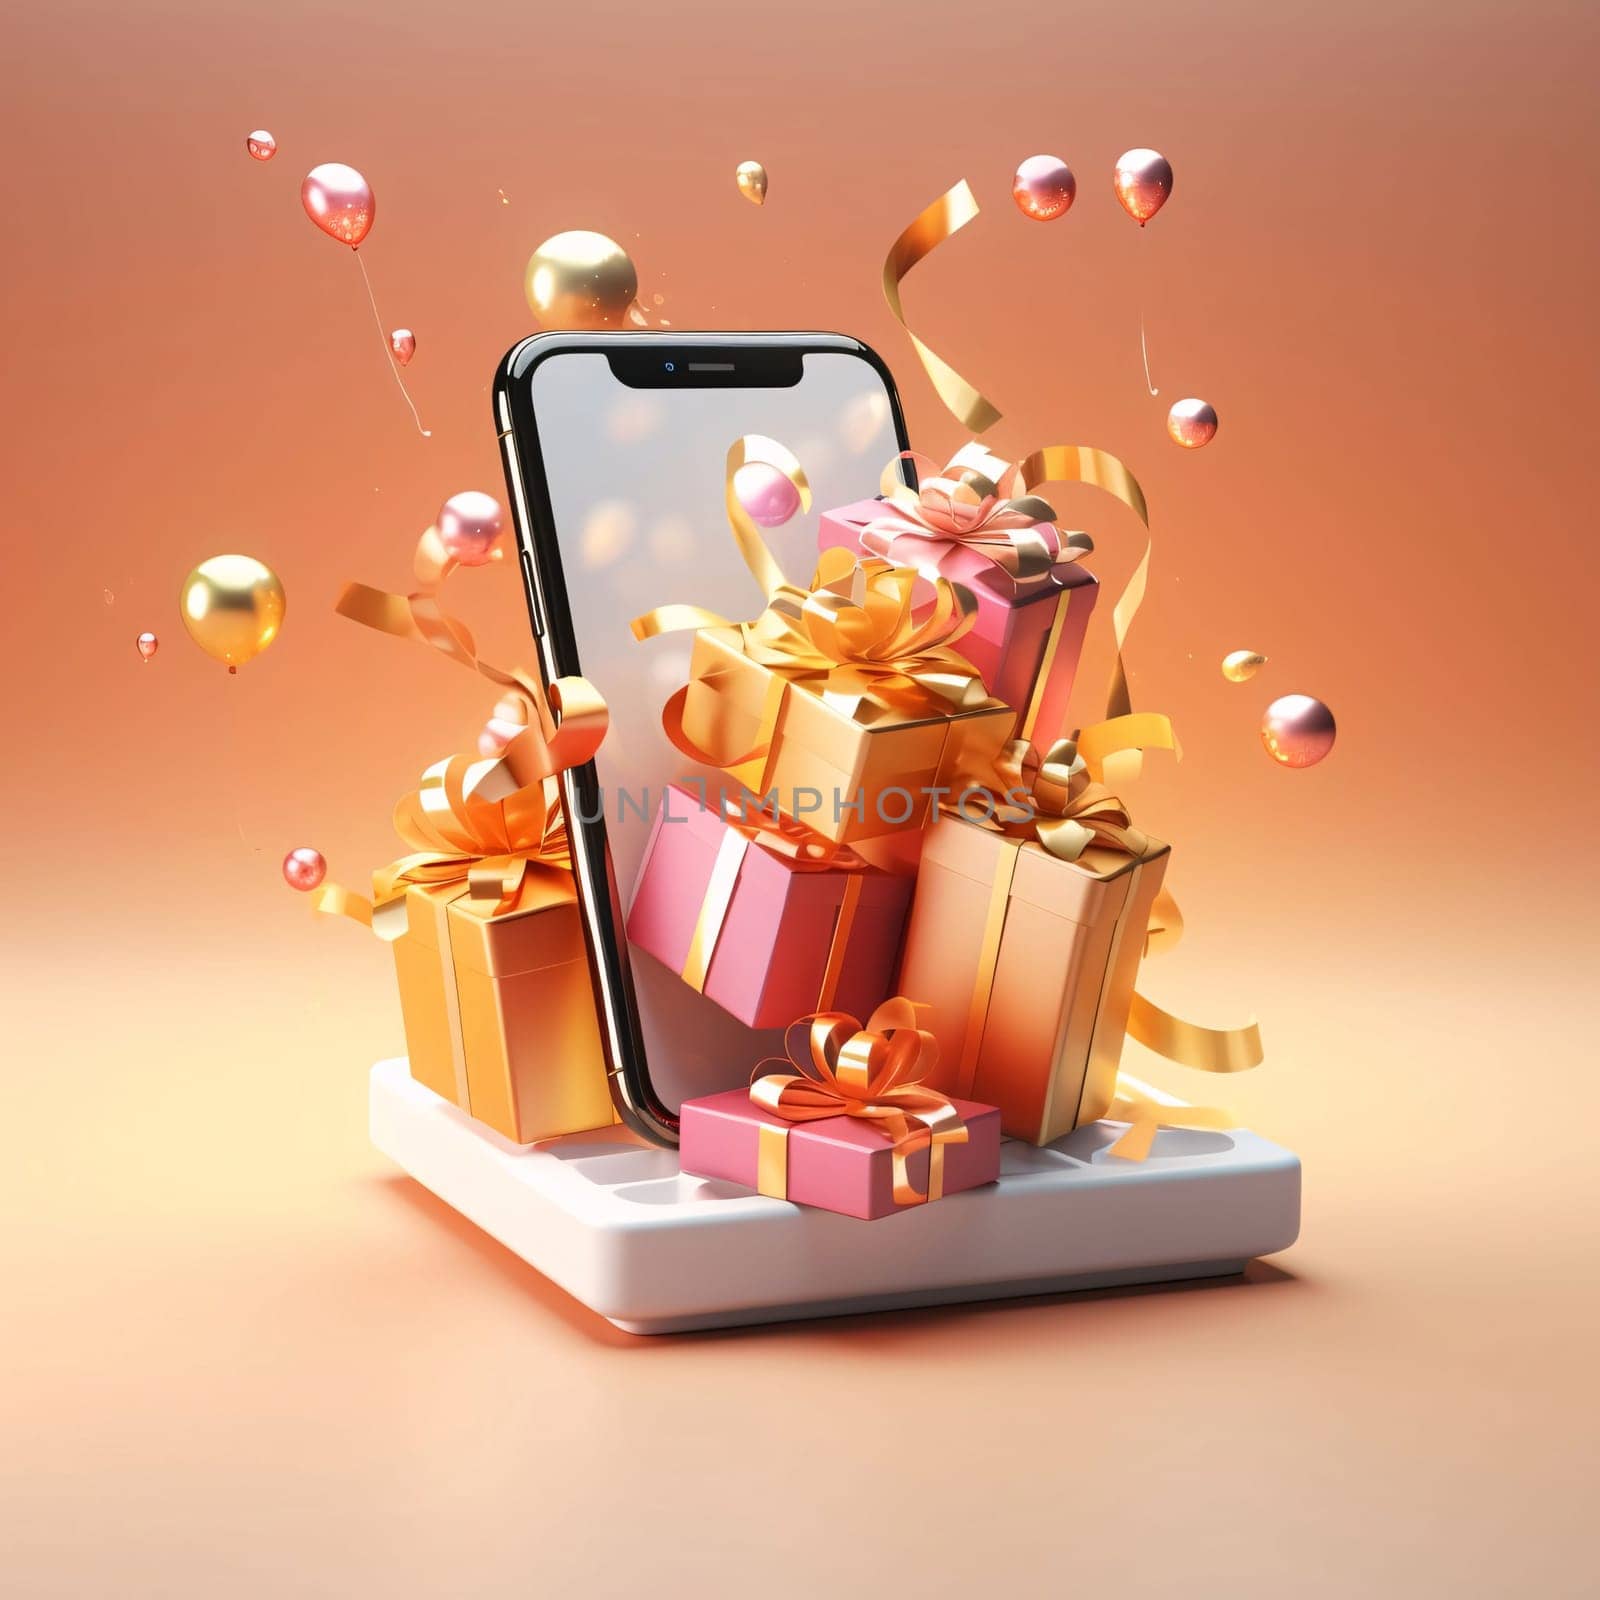 Abstract Gifts with Cocards. Golden balls and smartphone screen on white podium, orange background.Valentine's Day banner with space for your own content. Heart as a symbol of affection and love.